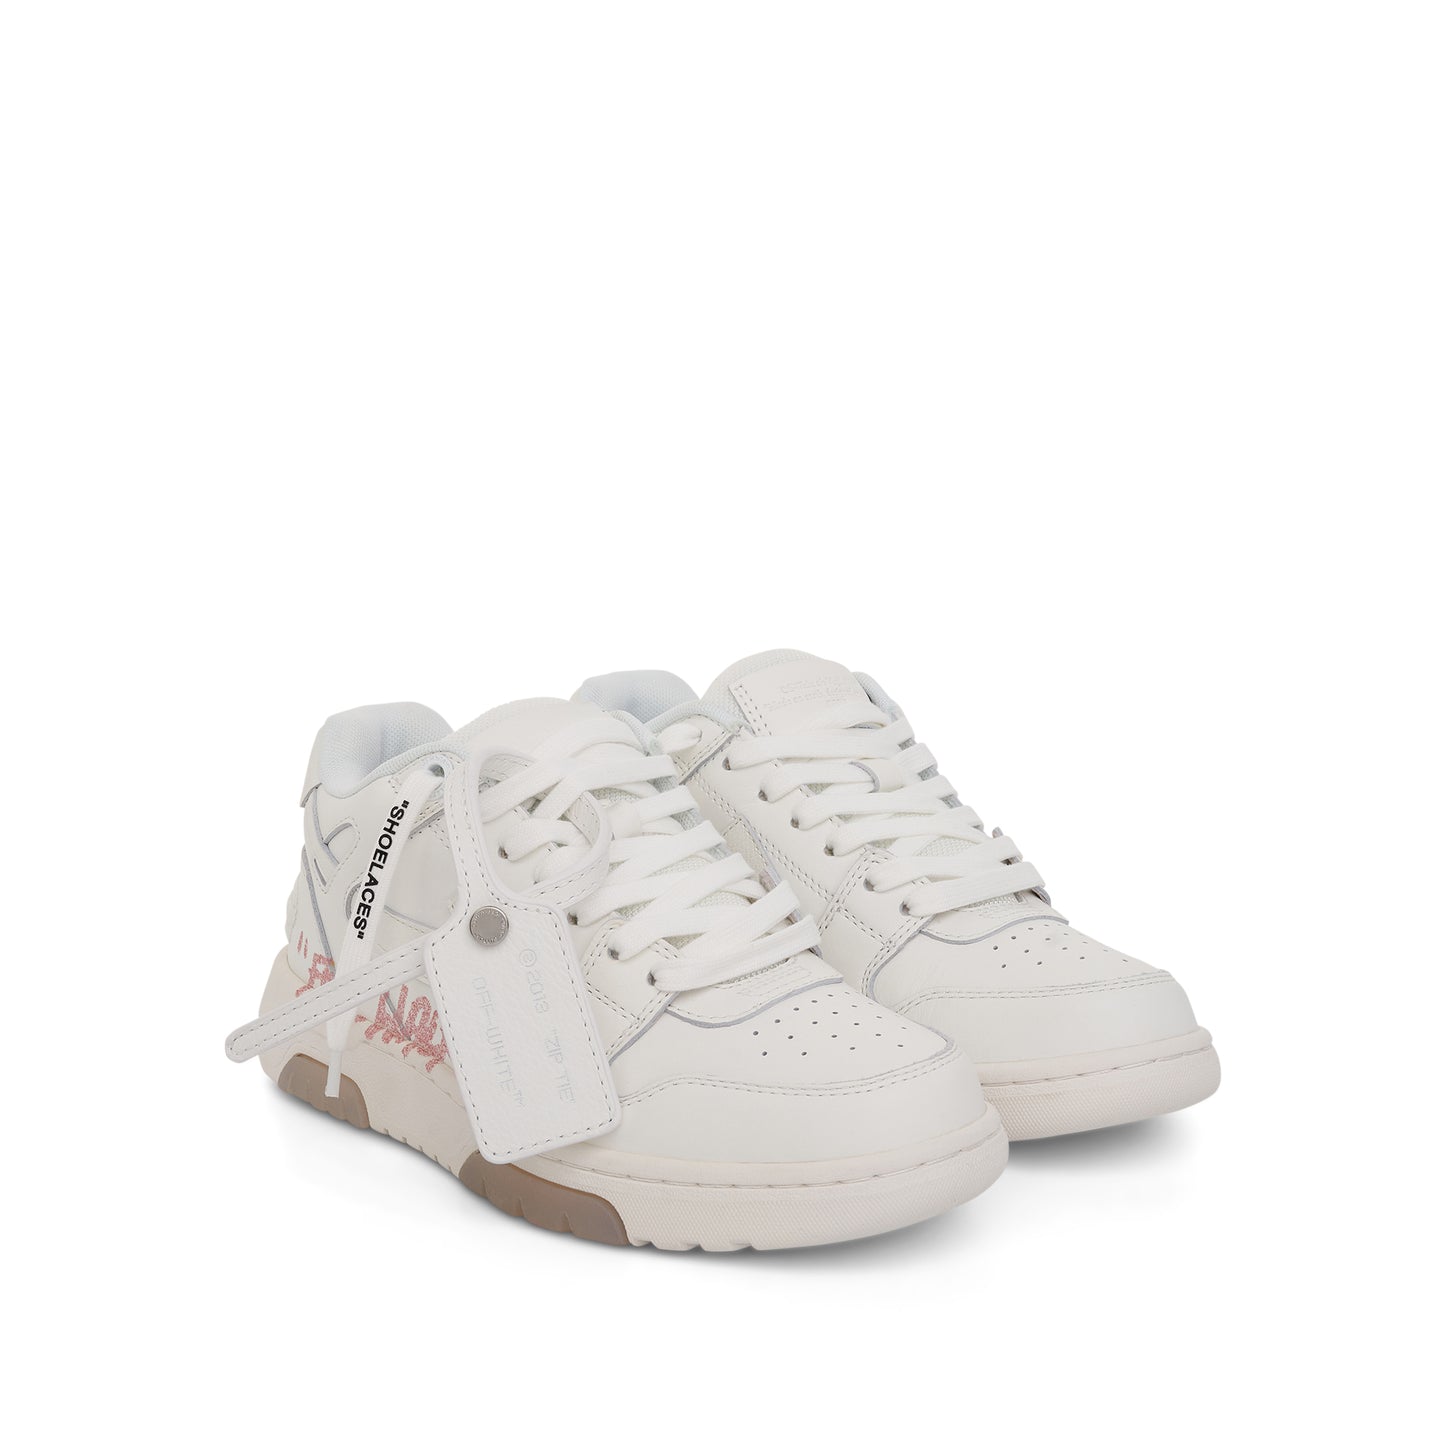 Out Of Office "For Walking" Sneakers in White/Peach